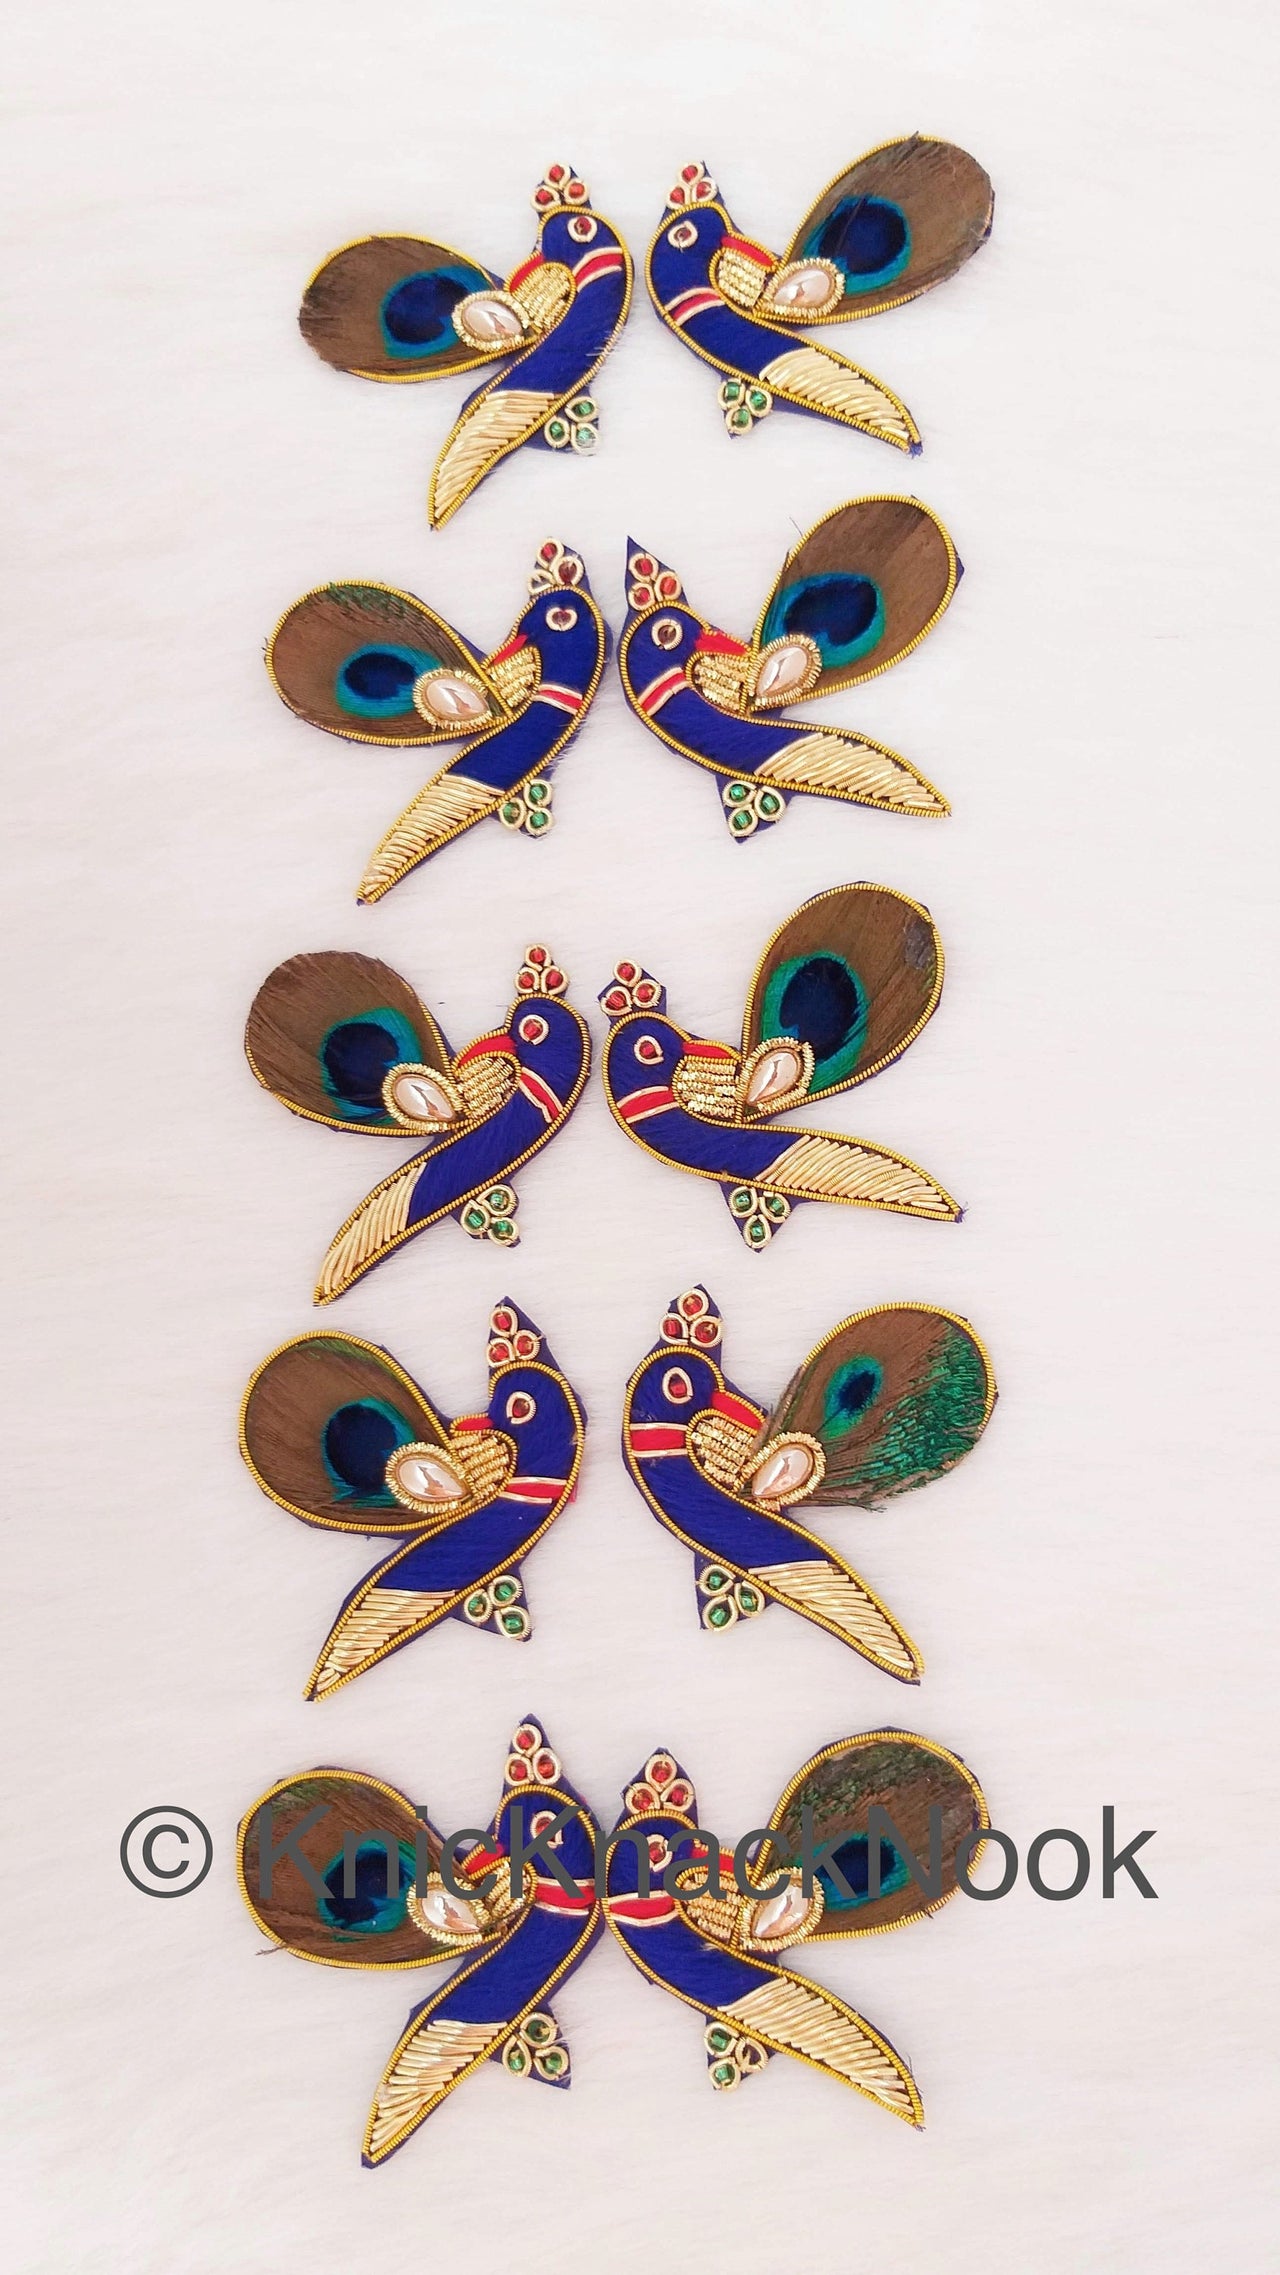 Hand Embroidered Peacock Applique In Blue, Red and Gold Embroidery With Peacock Feather And Gold Bead, Zardozi Work